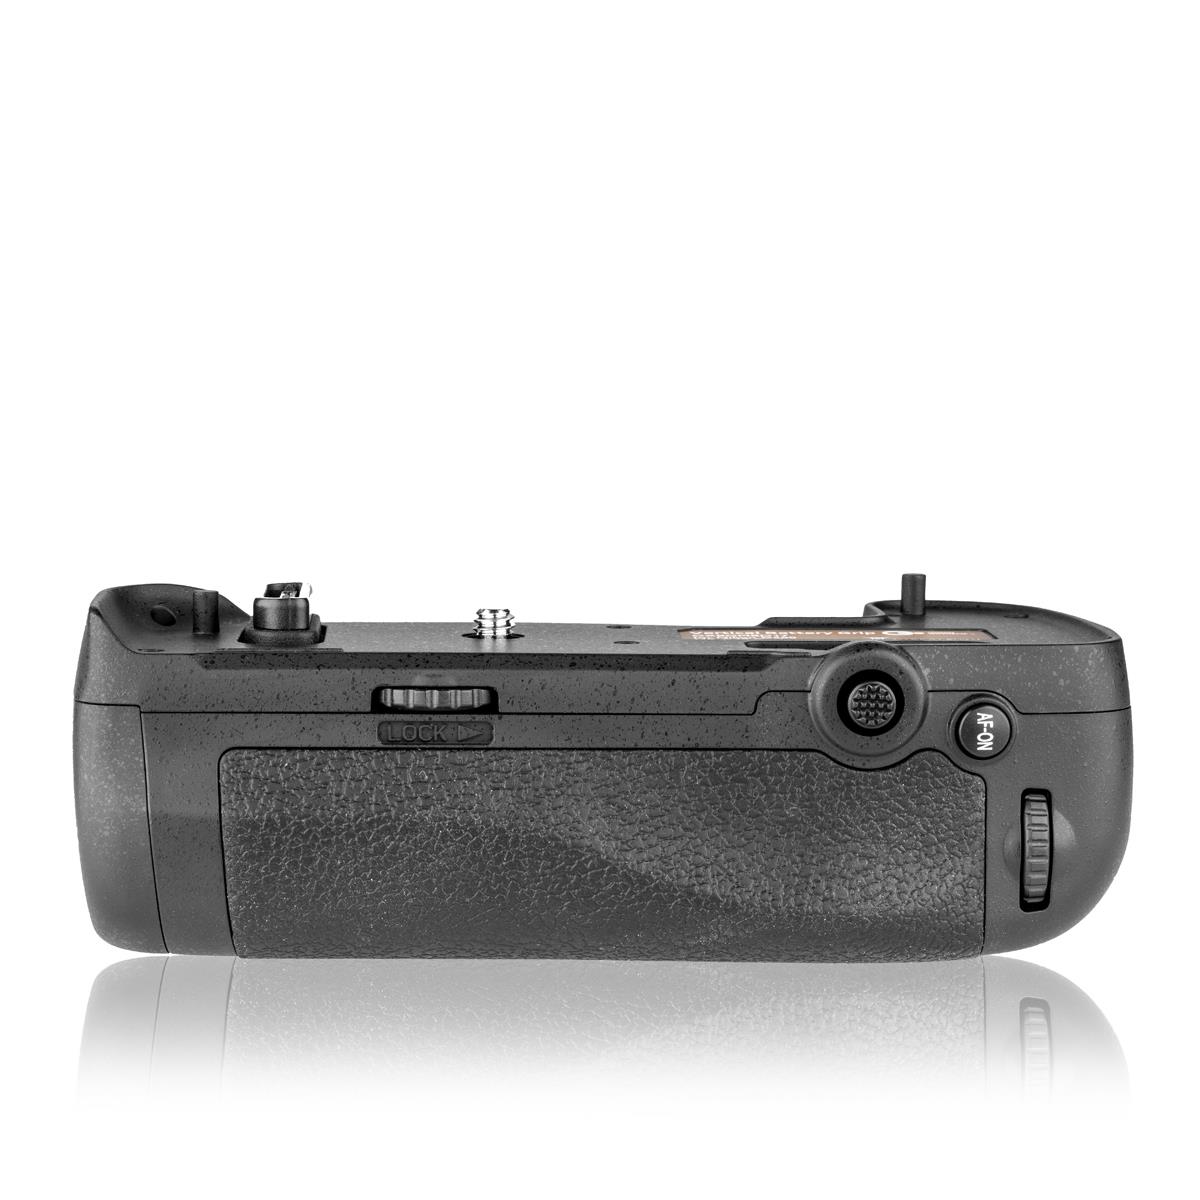 Image of Green Extreme MB-D17 Battery Grip for Nikon D500